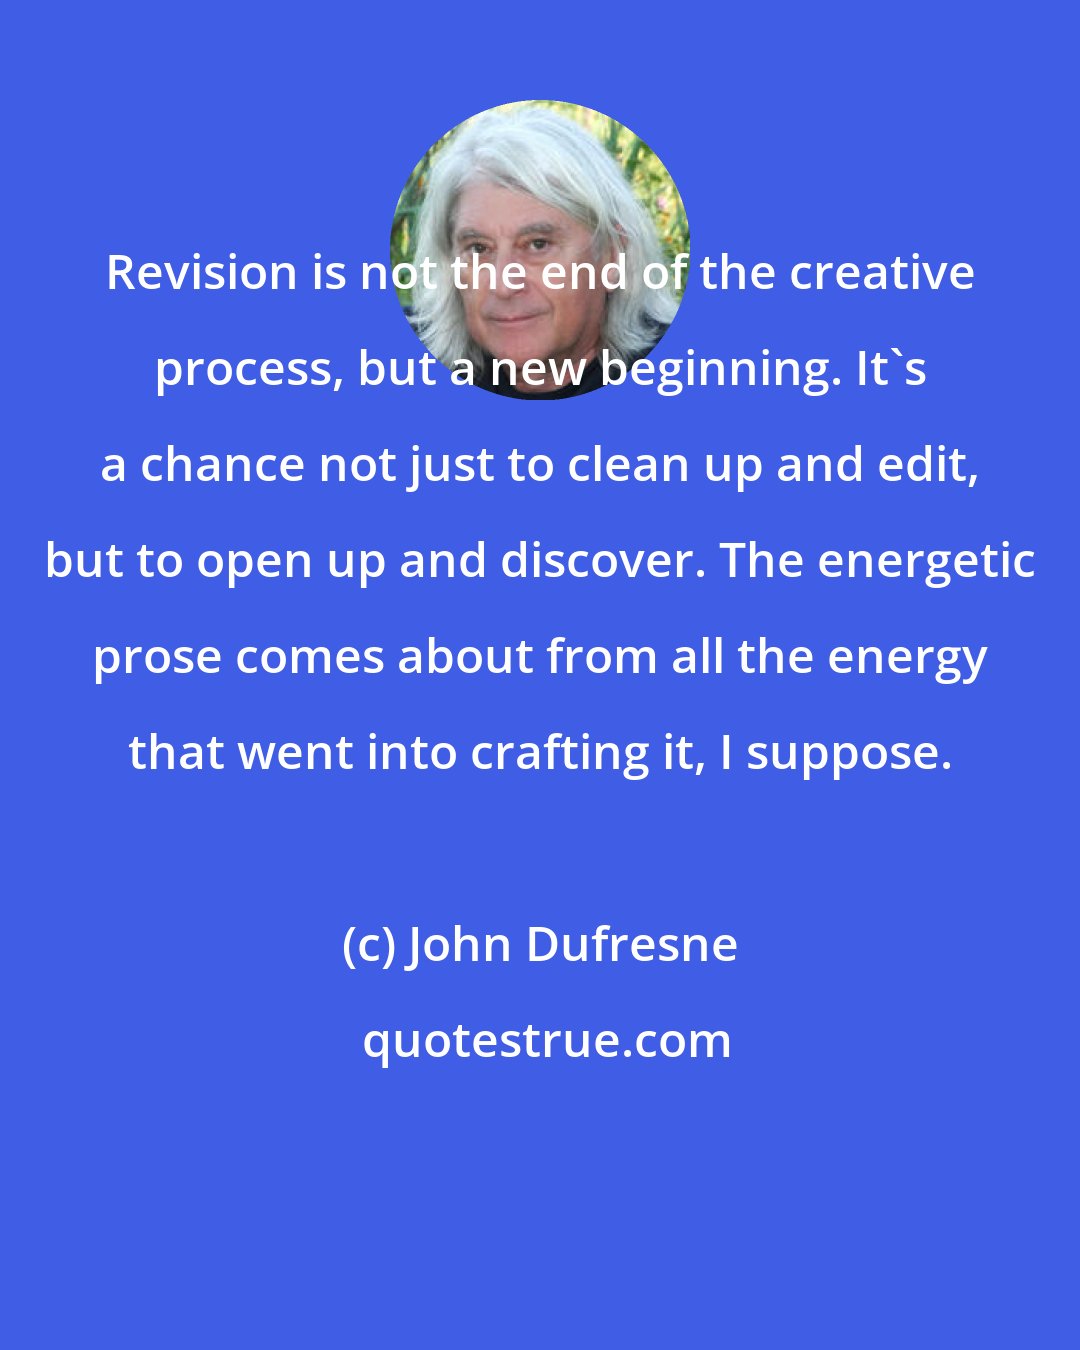 John Dufresne: Revision is not the end of the creative process, but a new beginning. It's a chance not just to clean up and edit, but to open up and discover. The energetic prose comes about from all the energy that went into crafting it, I suppose.